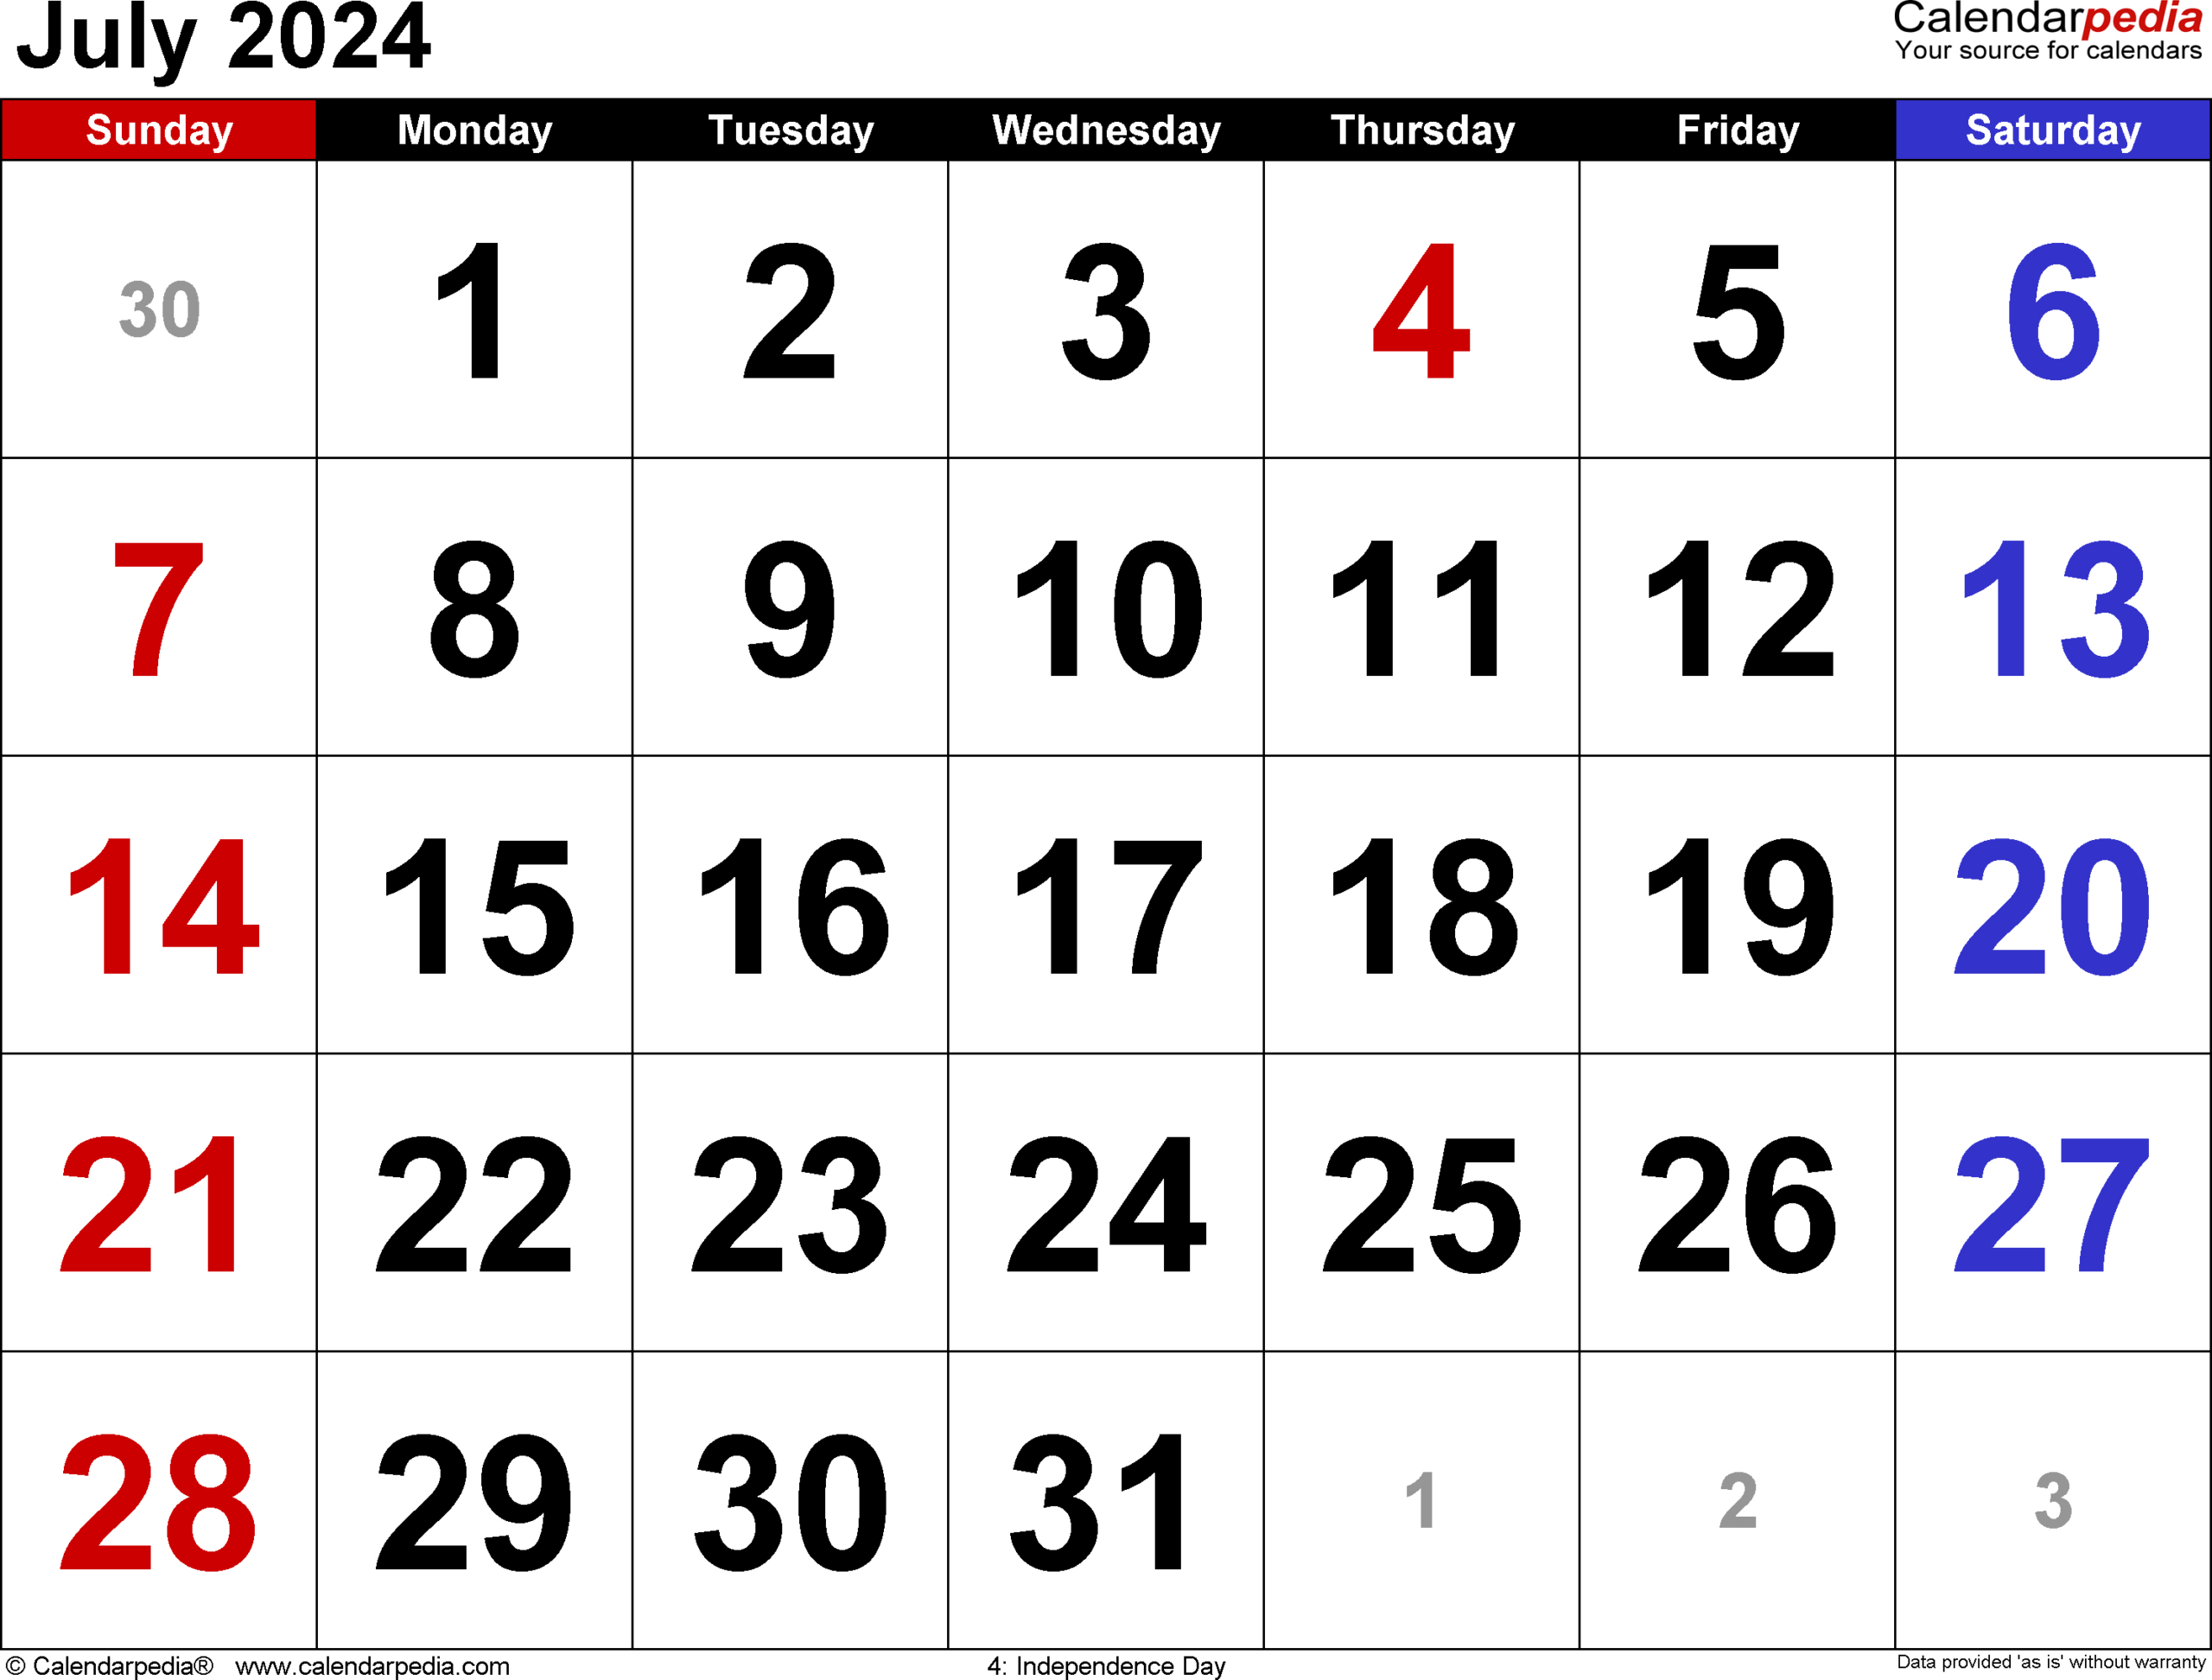 July 2024 Calendar | Templates For Word, Excel And Pdf inside July 2024 Calendar Editable Word